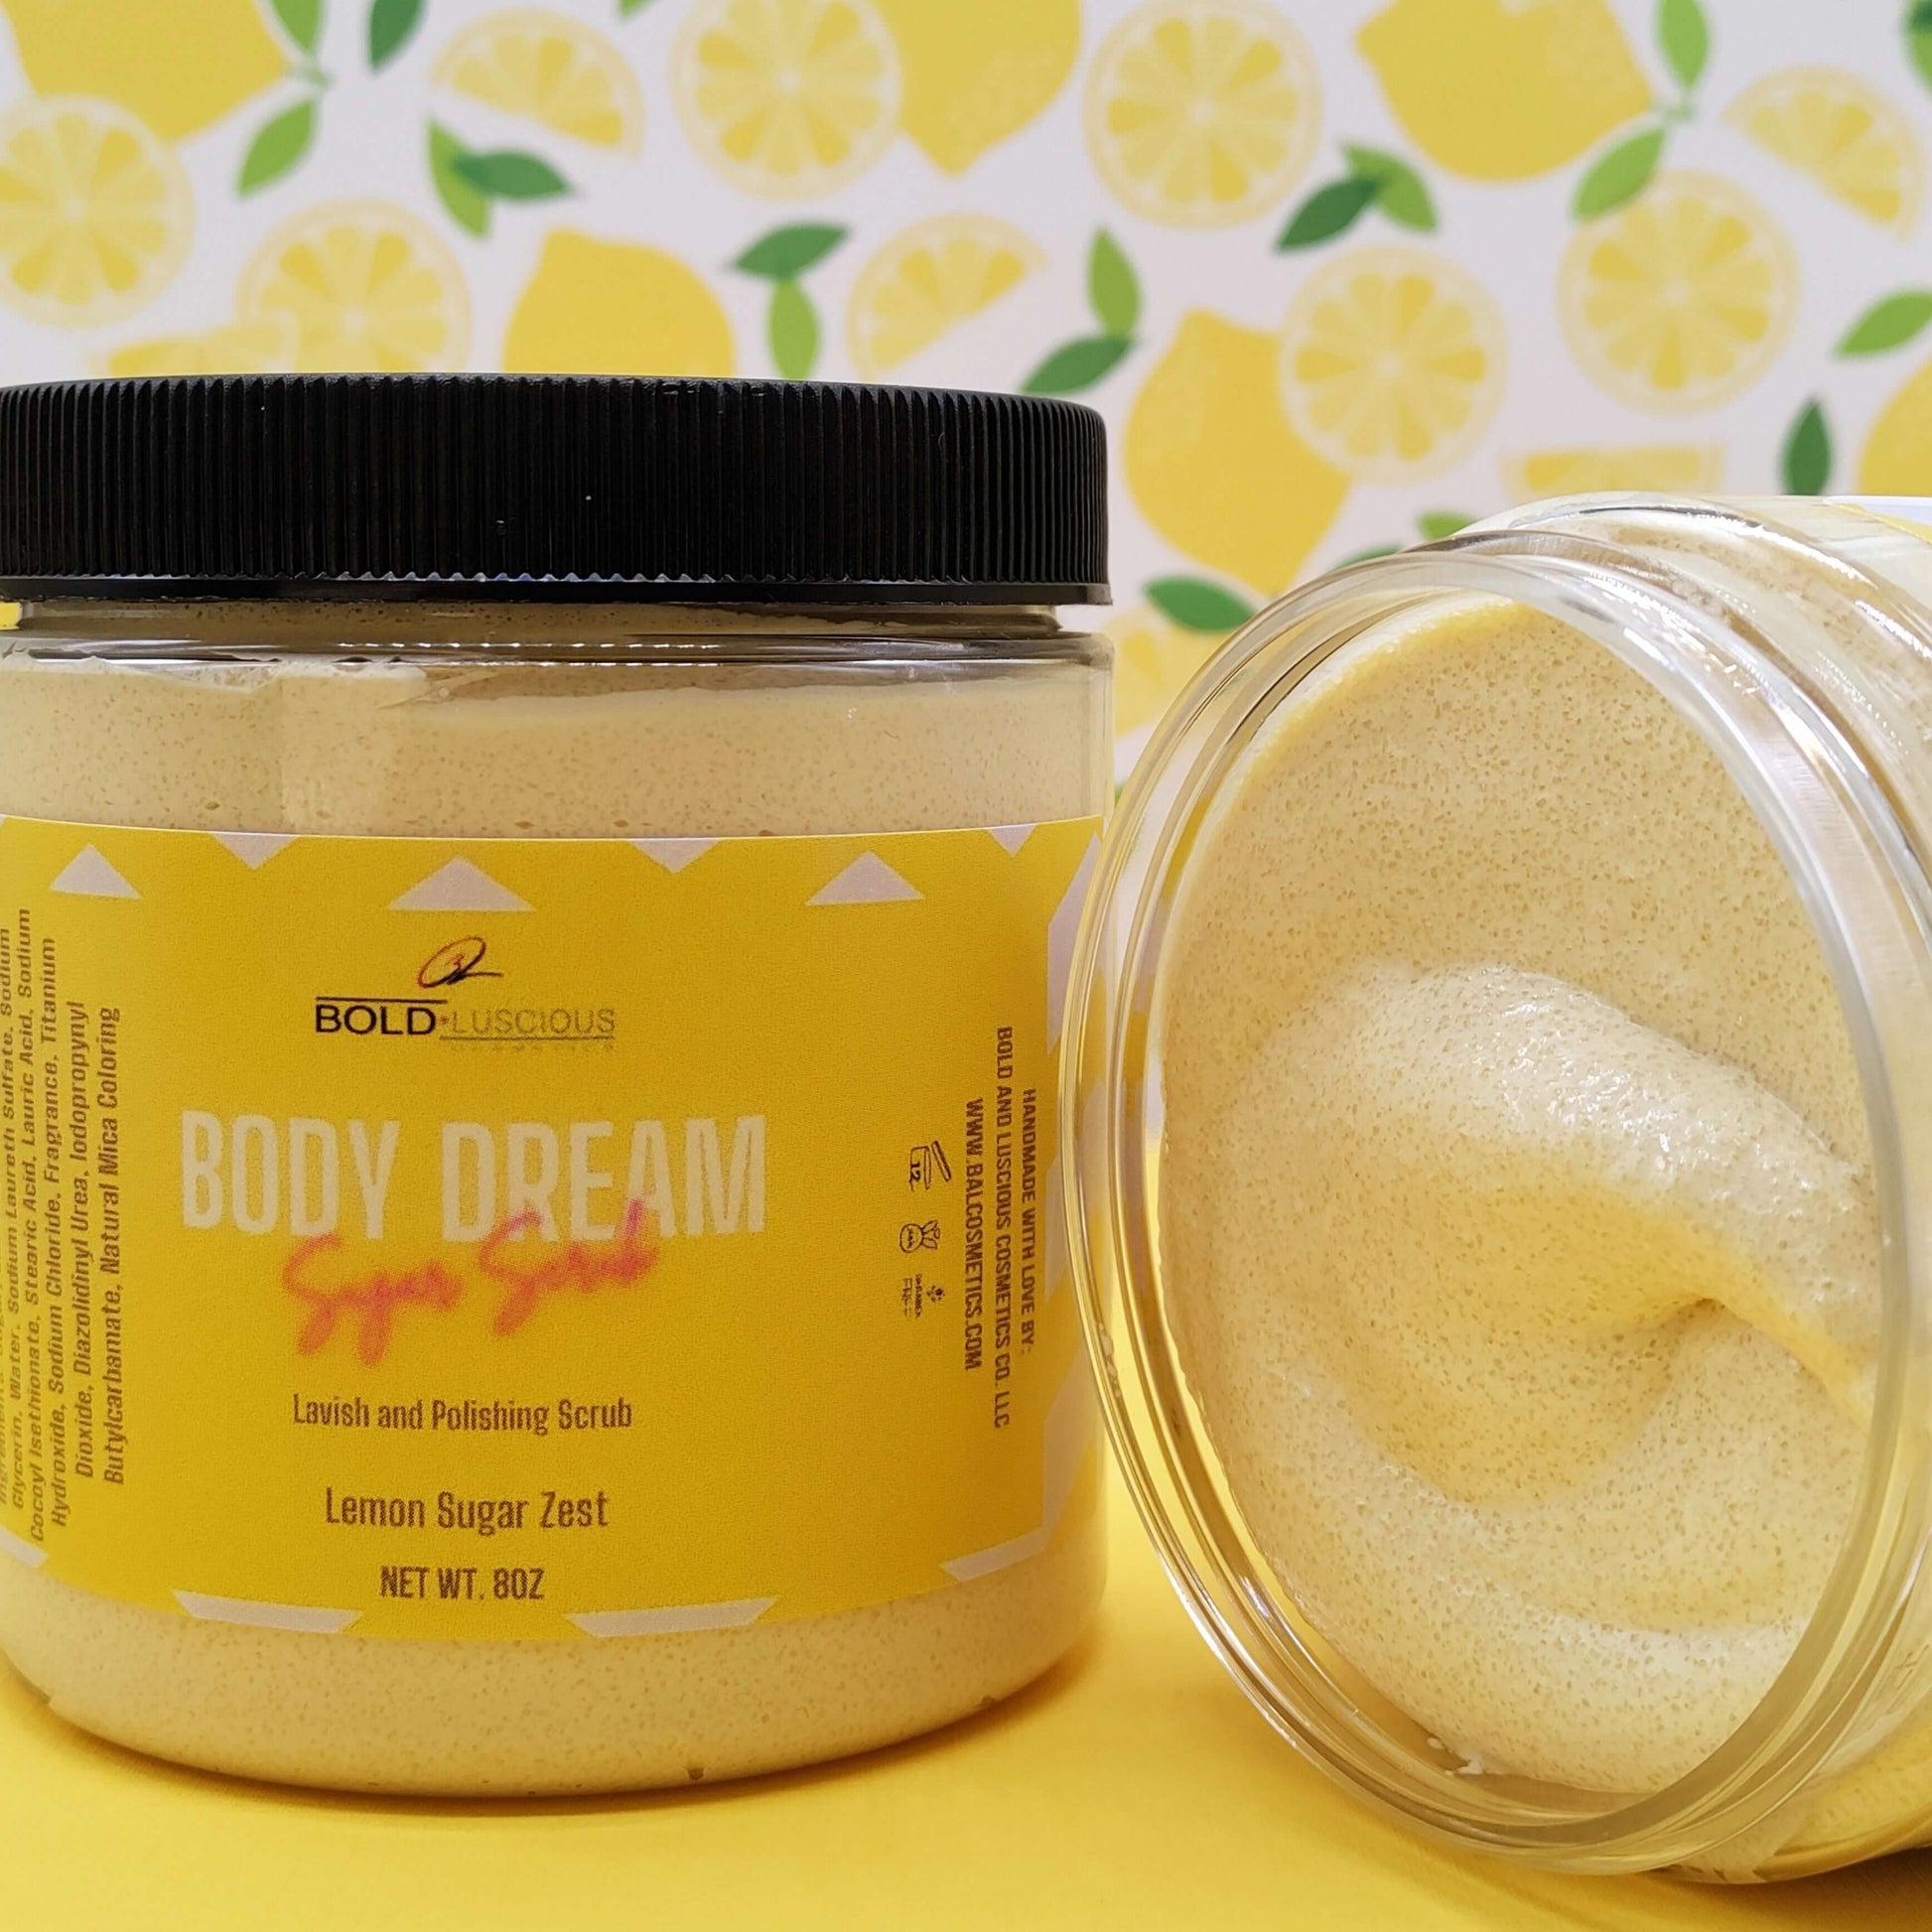 There are two Bold and Luscious Cosmetics Lemon Zest scrubs in this picture for illustration. One is the closed bottle of 8 ounces of scrub with a yellow label. The second is an open container showing its thick and creamy texture.  The background style has a pattern of lemons to give this image a vibrant feel.